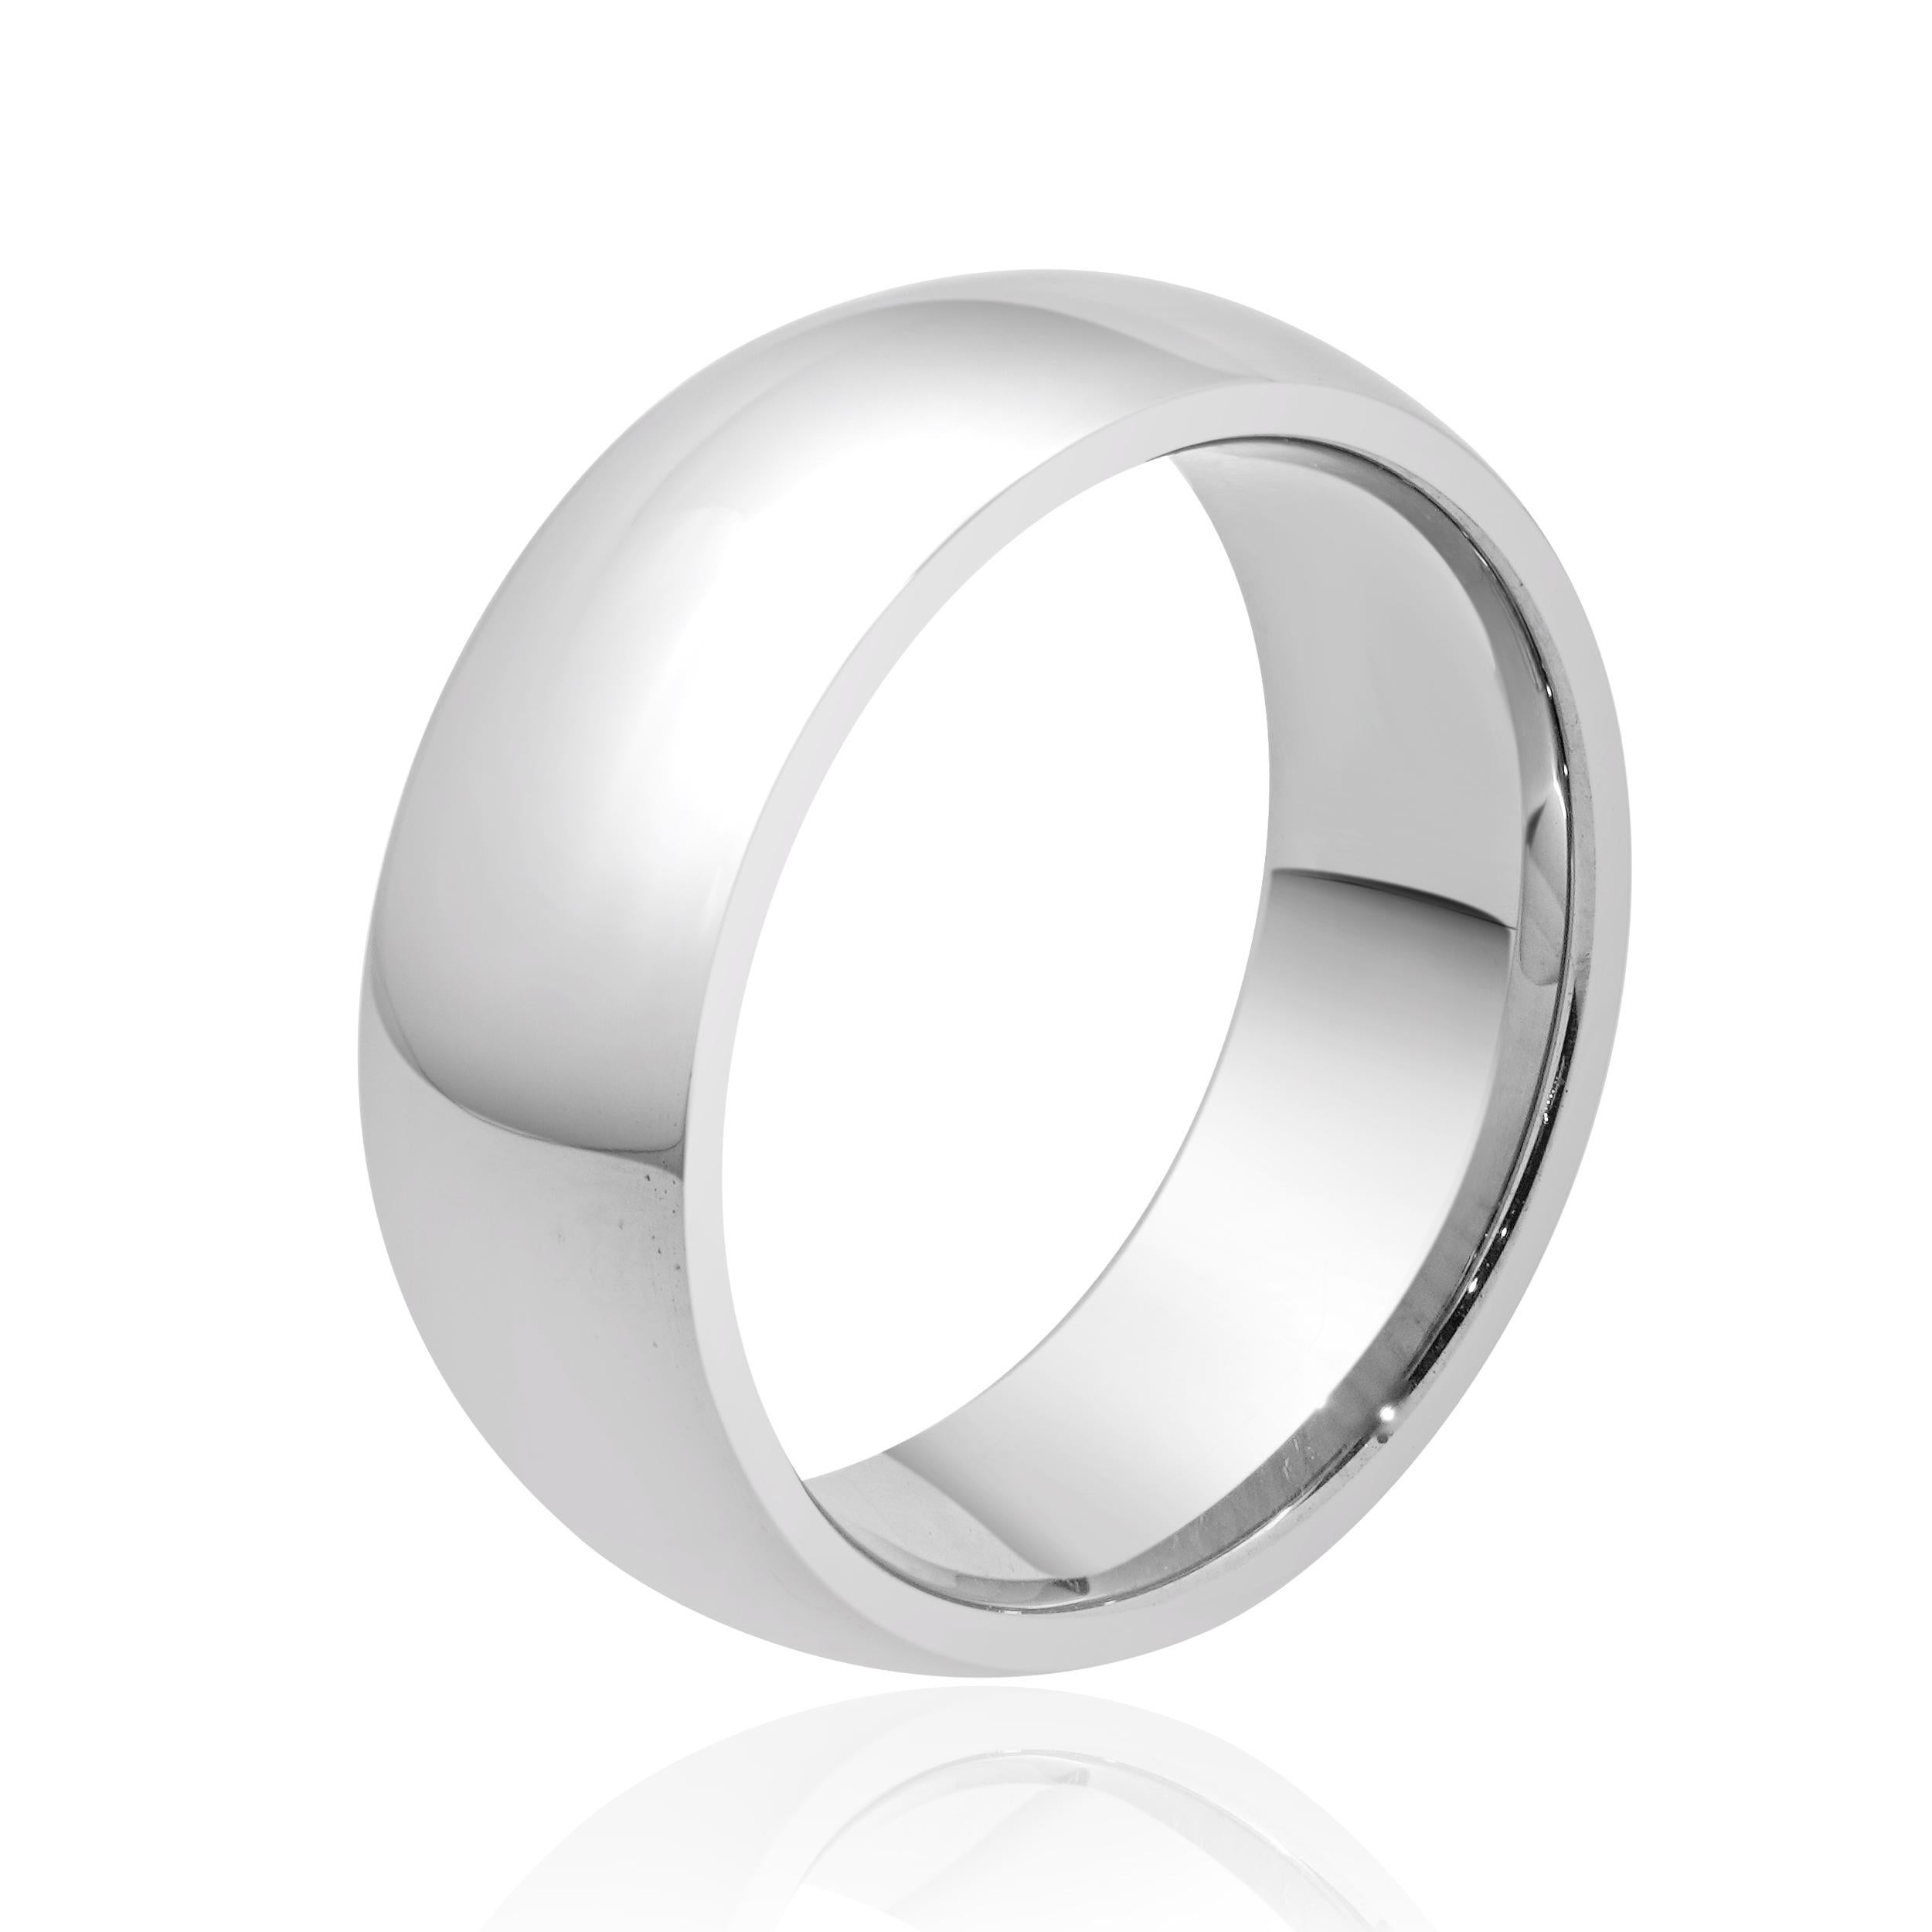 Designer: custom 
Material: tungsten
Dimensions: band measures 8mm wide
Size: 9
Weight: 15.20 grams
